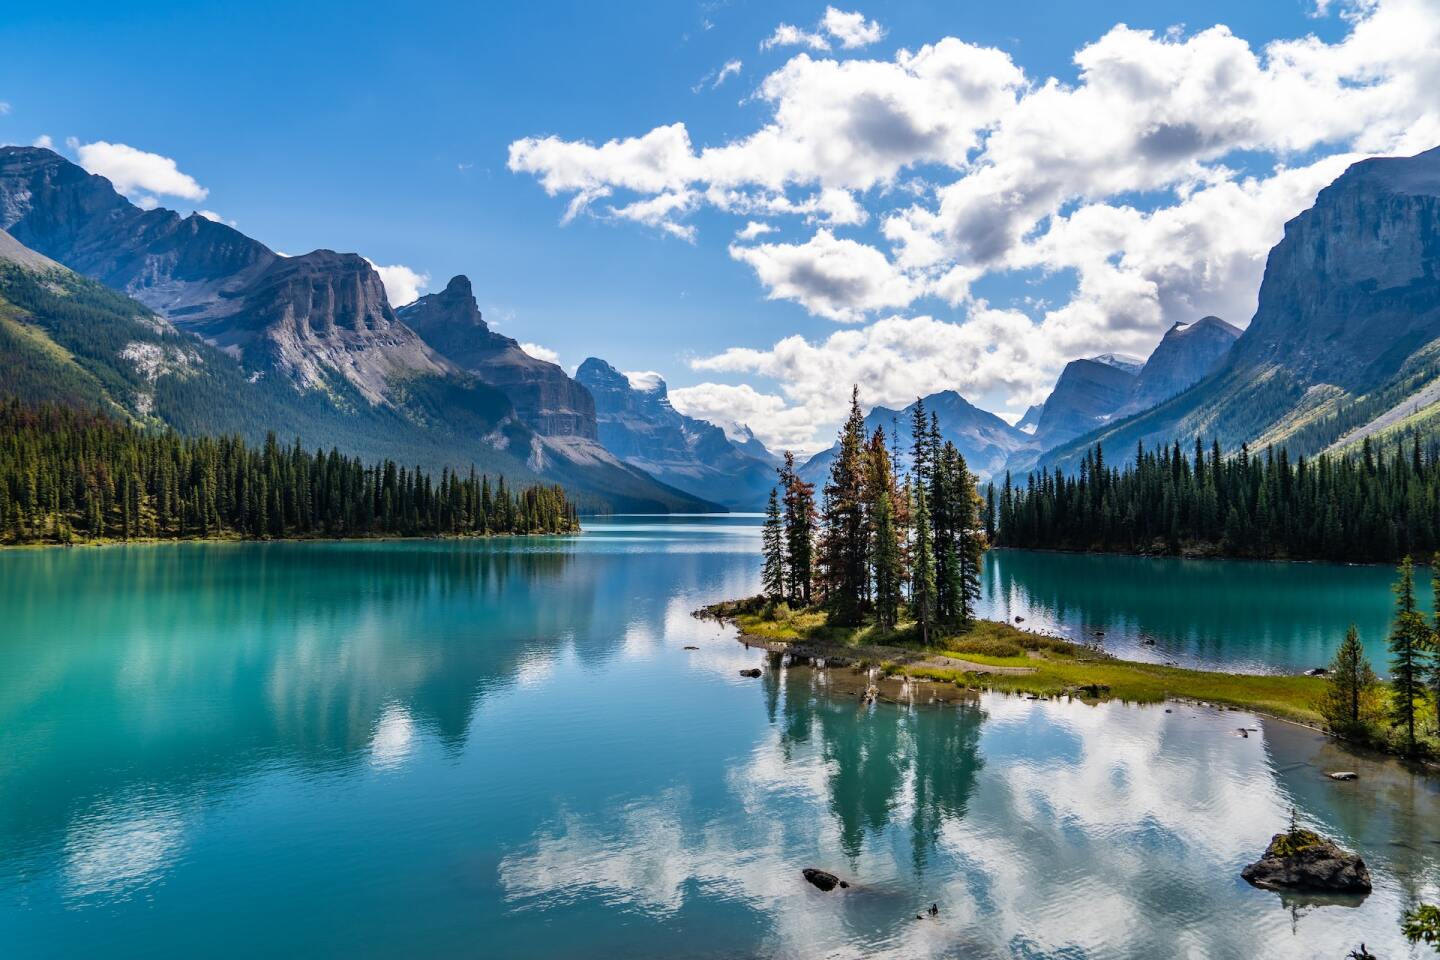 <h2>4. Jasper National Park</h2> <p><i>Alberta</i></p> <p>If you think Banff is all there is to the Canadian Rockies, think again: When <a class="Link" href="https://whc.unesco.org/en/list/304/" rel="noopener">UNESCO</a> declared the area a World Heritage site in 1984, it also included the parks of Jasper, <a class="Link" href="https://www.pc.gc.ca/en/pn-np/bc/kootenay" rel="noopener">Kootenay</a>, and <a class="Link" href="https://www.pc.gc.ca/en/pn-np/bc/yoho" rel="noopener">Yoho</a>. The biggest of the four—<a class="Link" href="https://www.afar.com/magazine/the-essential-guide-to-jasper-national-park-canada" rel="noopener">Jasper National Park</a>—spans a whopping 4,300 square miles. With a 2021 yearly visitor count of <a class="Link" href="https://parks.canada.ca/pn-np/ab/jasper/gestion-management/plan/2021" rel="noopener">2.1 million people</a> (compared to Banff’s 3.6 million), Jasper’s relative <a class="Link" href="https://www.afar.com/magazine/how-to-beat-the-crowds-at-banff-national-park" rel="noopener">lack of people </a>lends itself to more Kodak moments with Rocky Mountain wildlife.</p> <p>If you <i>do </i>want to travel to one of the park’s more popular attractions, head to Maligne Lake, the largest natural lake in the Canadian Rockies. Check out the vistas, which include the three glaciers you can see throughout the year.</p> <h3>How to get to Jasper National Park</h3> <p>Edmonton’s airport is close to Jasper and gets direct flights from plenty of North American airports, including Denver and San Francisco. Once you fly in, be prepared to buckle up and drive, because the park is still 200 miles away. But if you’re going to Banff National Park in the same trip, driving Highway 93—also known as the Icefields Parkway—between them offers an exceptionally picturesque route, with views of ancient glaciers, lakes, and Rocky Mountain larches and pines.</p>